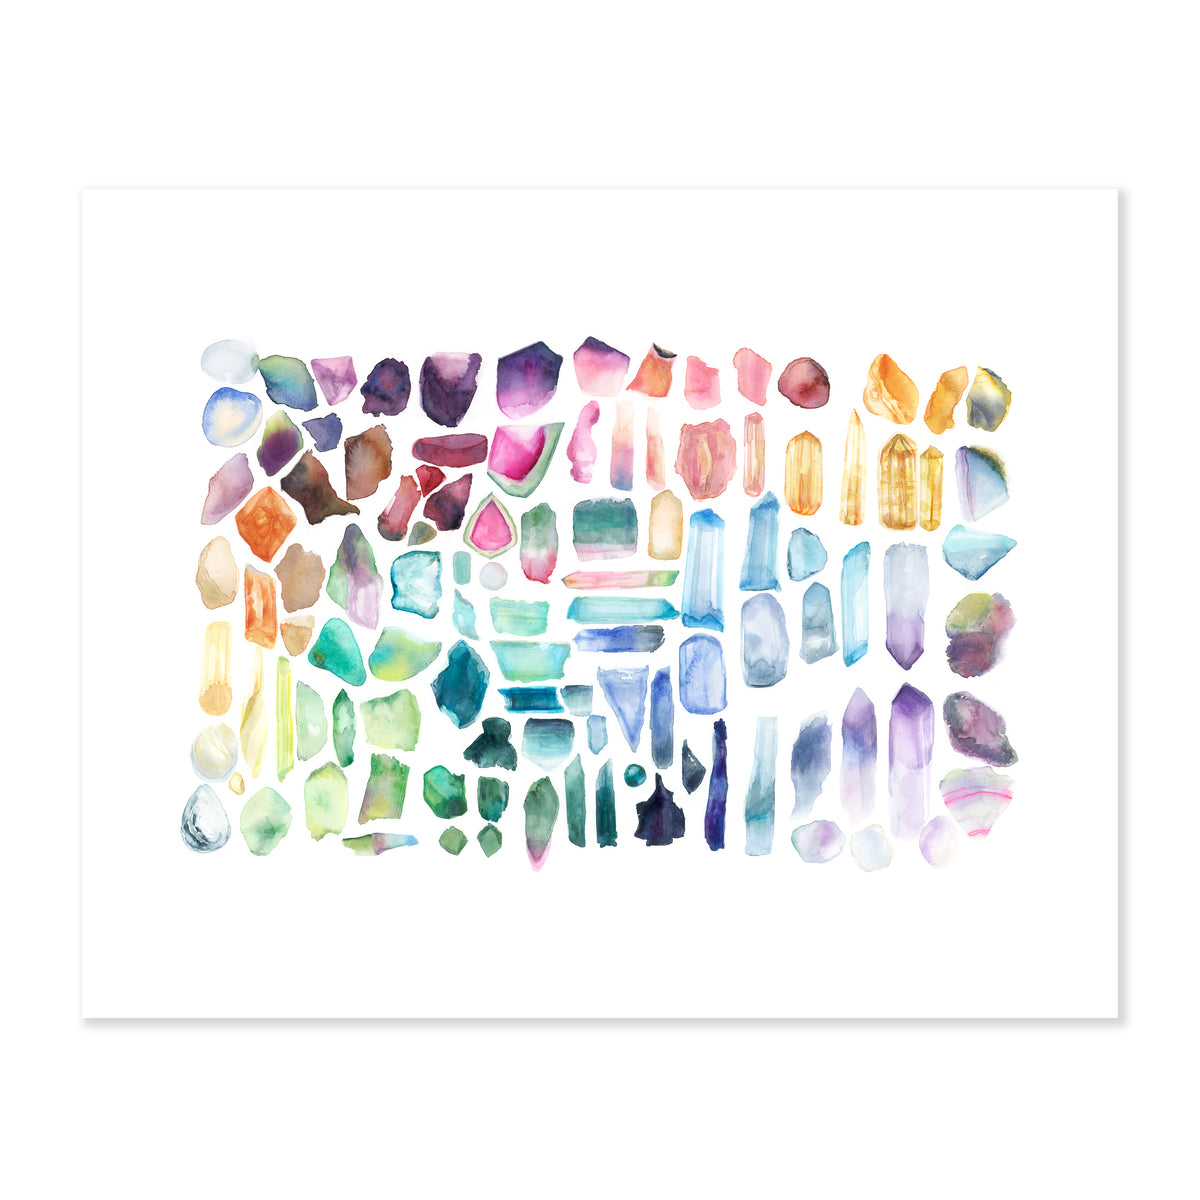 A fine art print illustrating a wide array of gemstones in various sizes and colors including purple pink blue green yellow orange and metallic drawn in watercolor on a soft white background